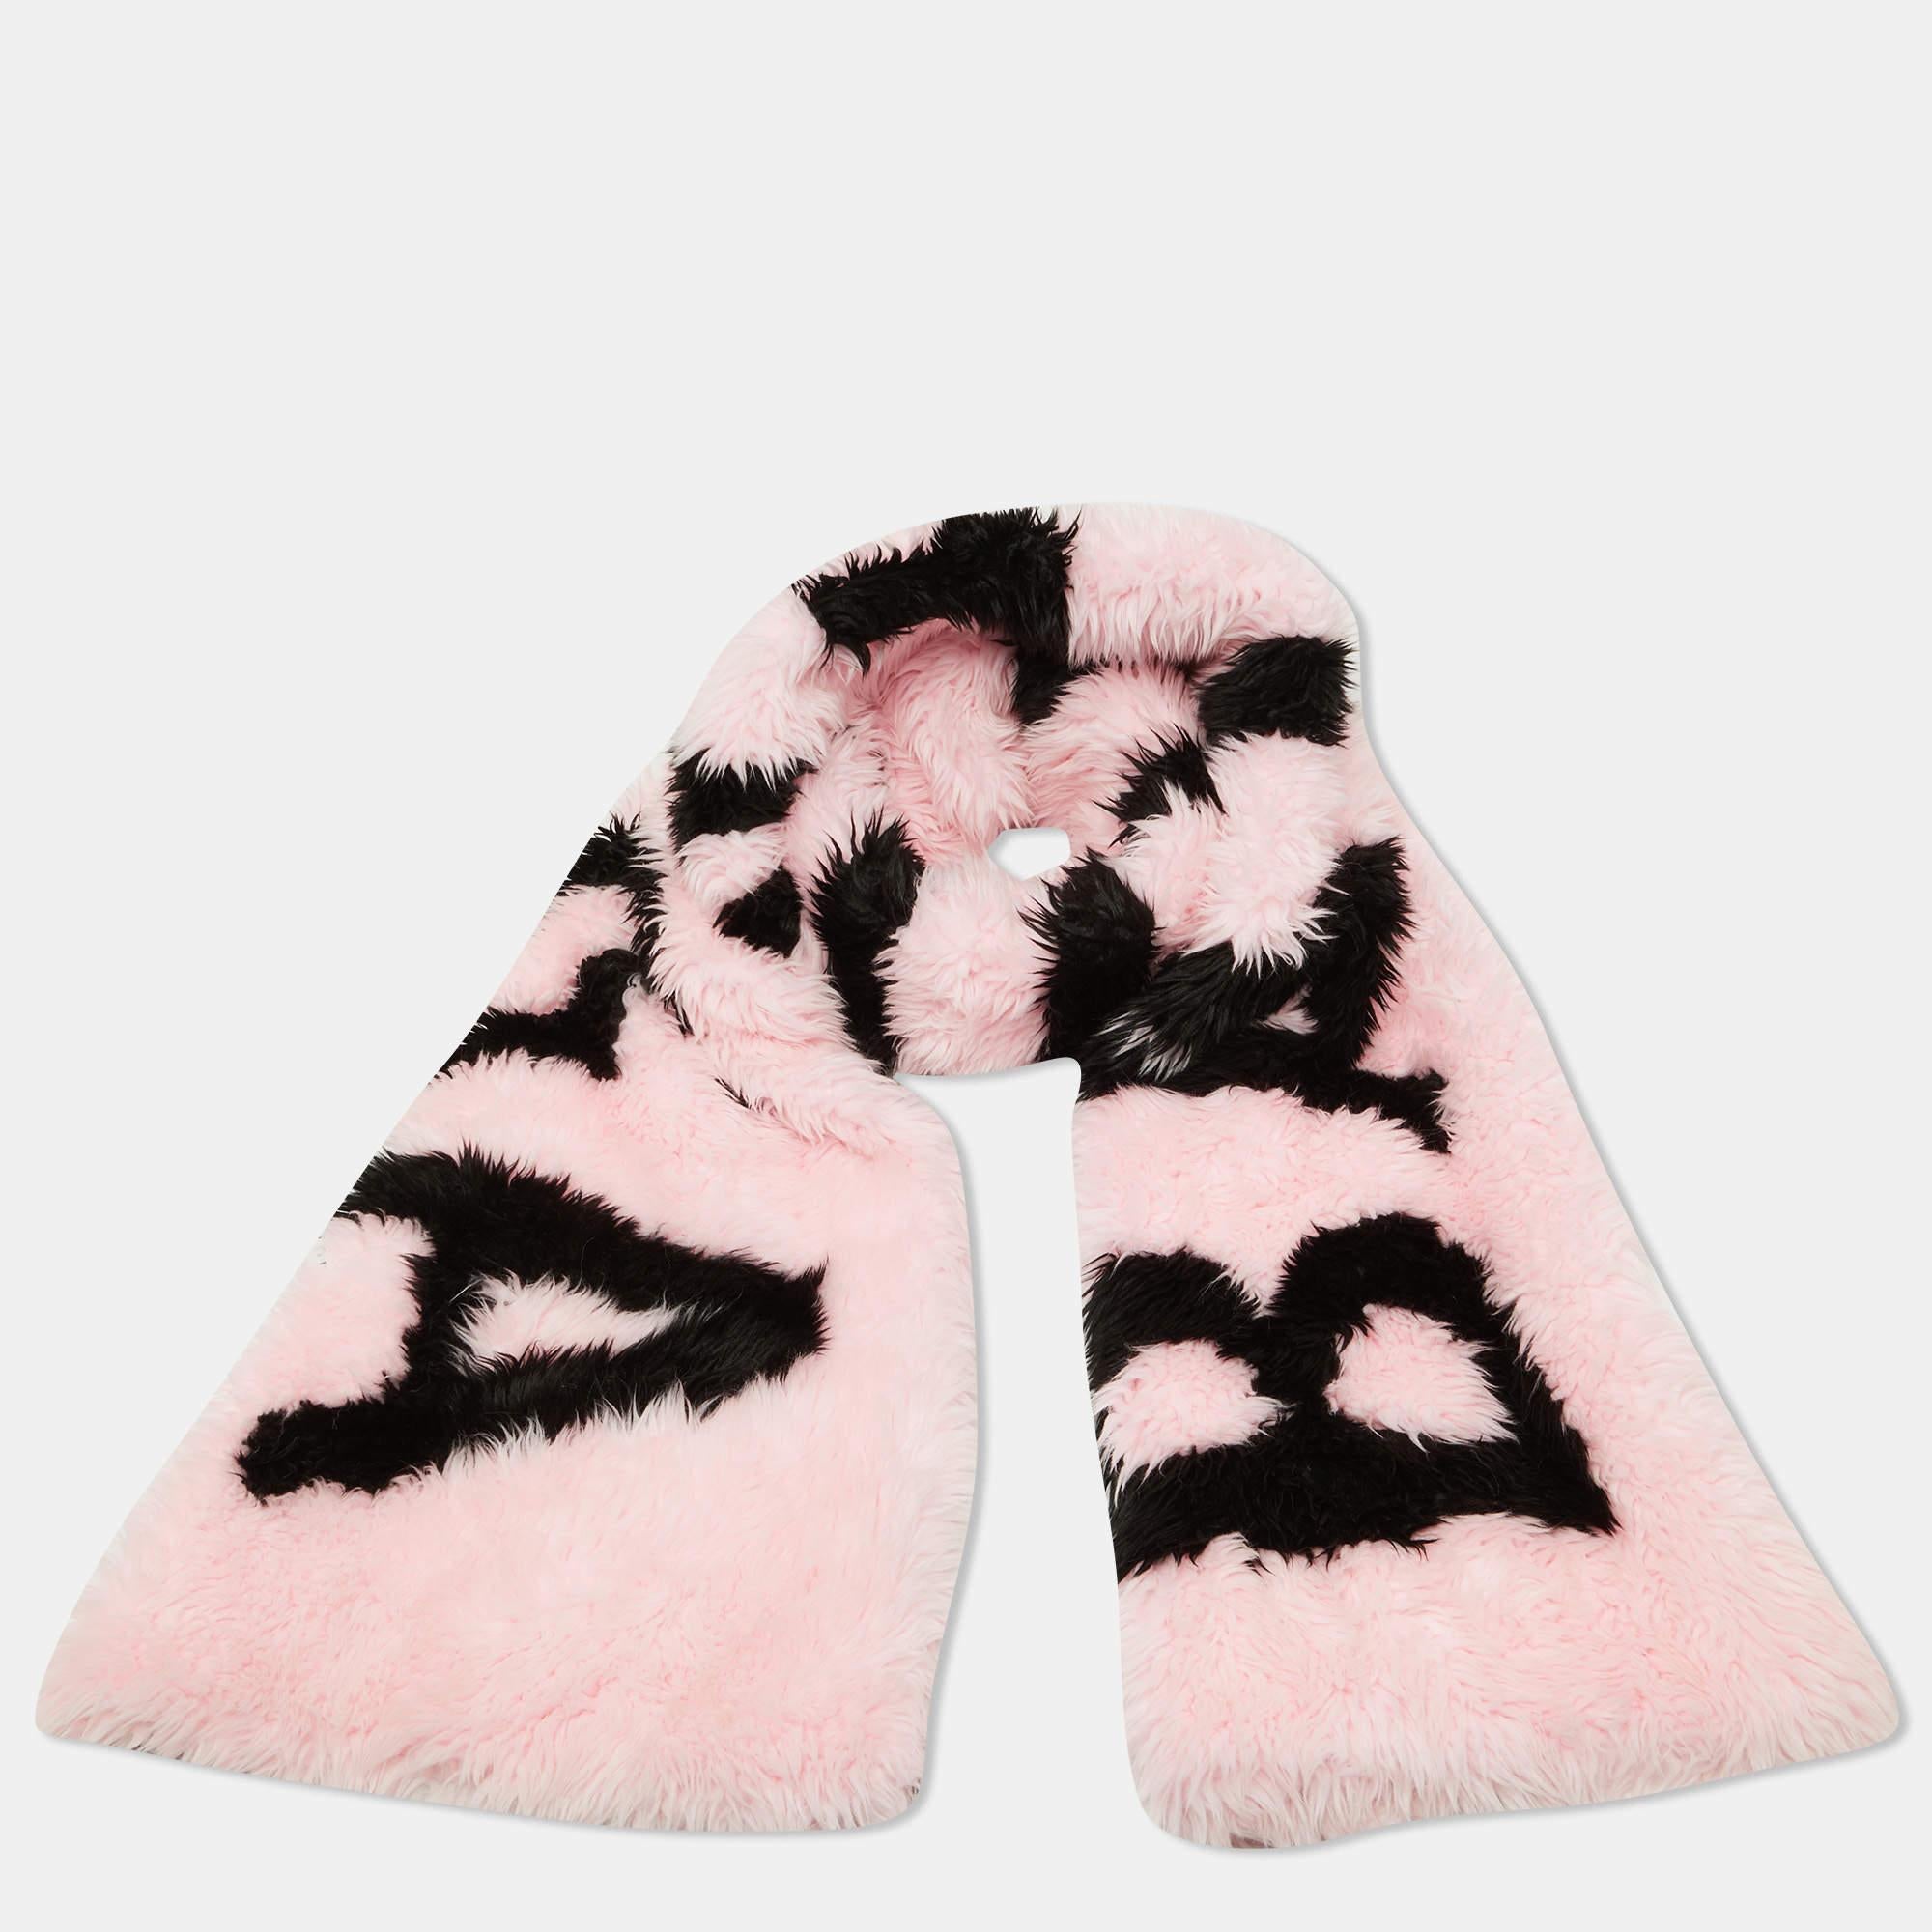 Balenciaga Pink Logo Printed Faux Fur & Quilted Detail Stole In Good Condition For Sale In Dubai, Al Qouz 2